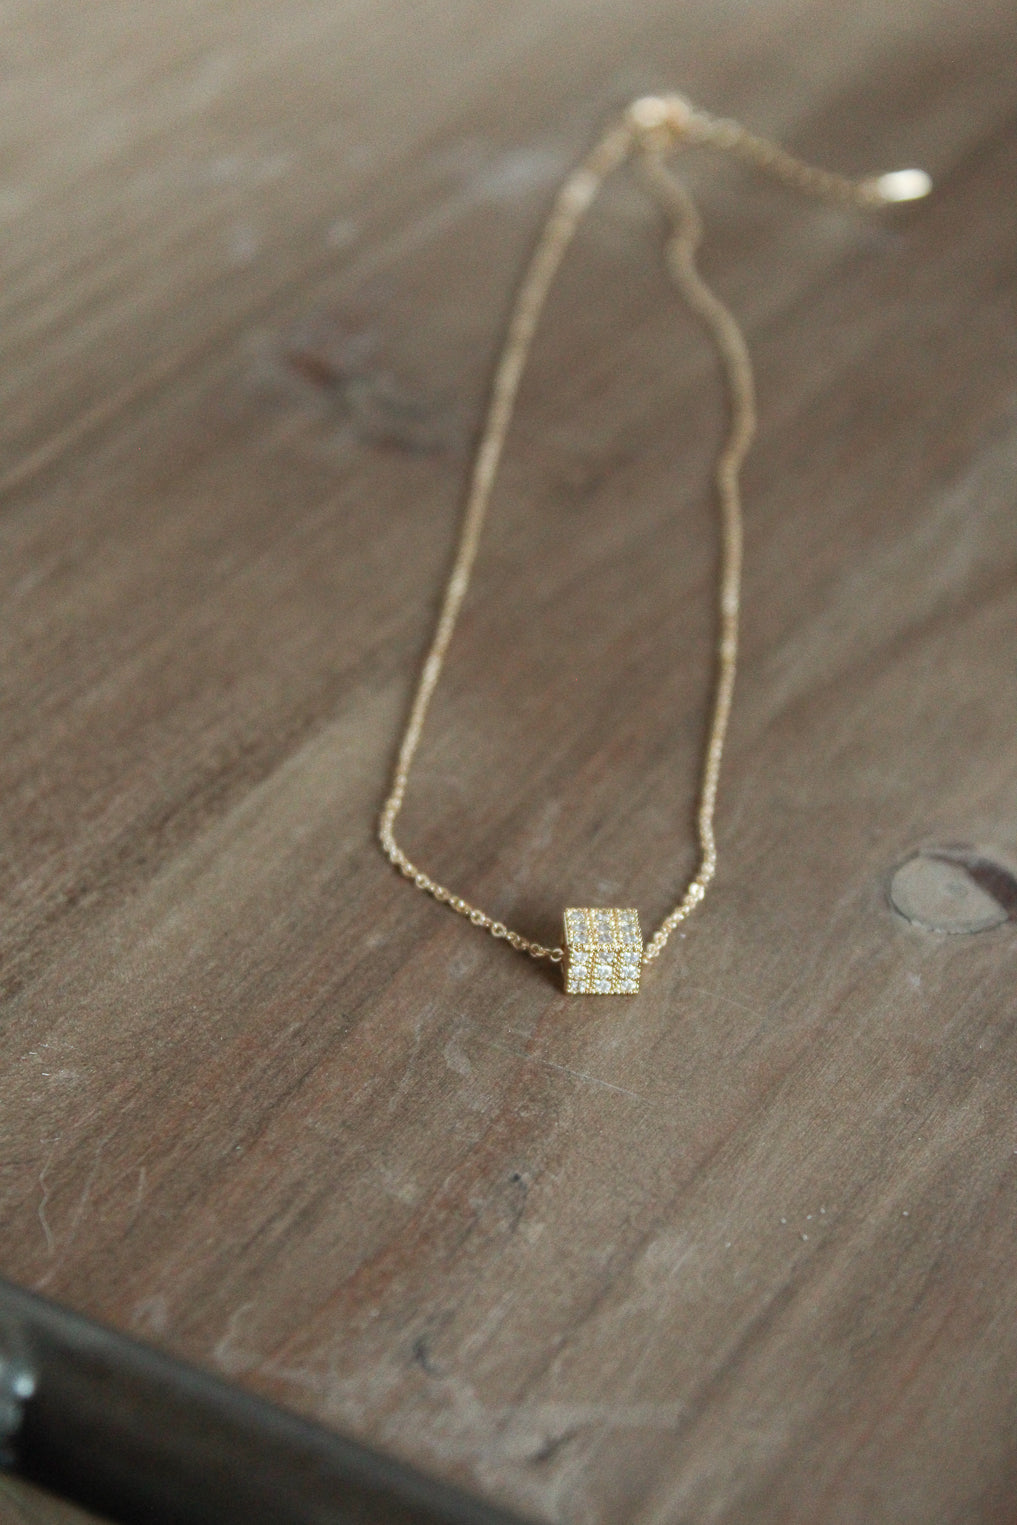 Cubed Stone Necklace